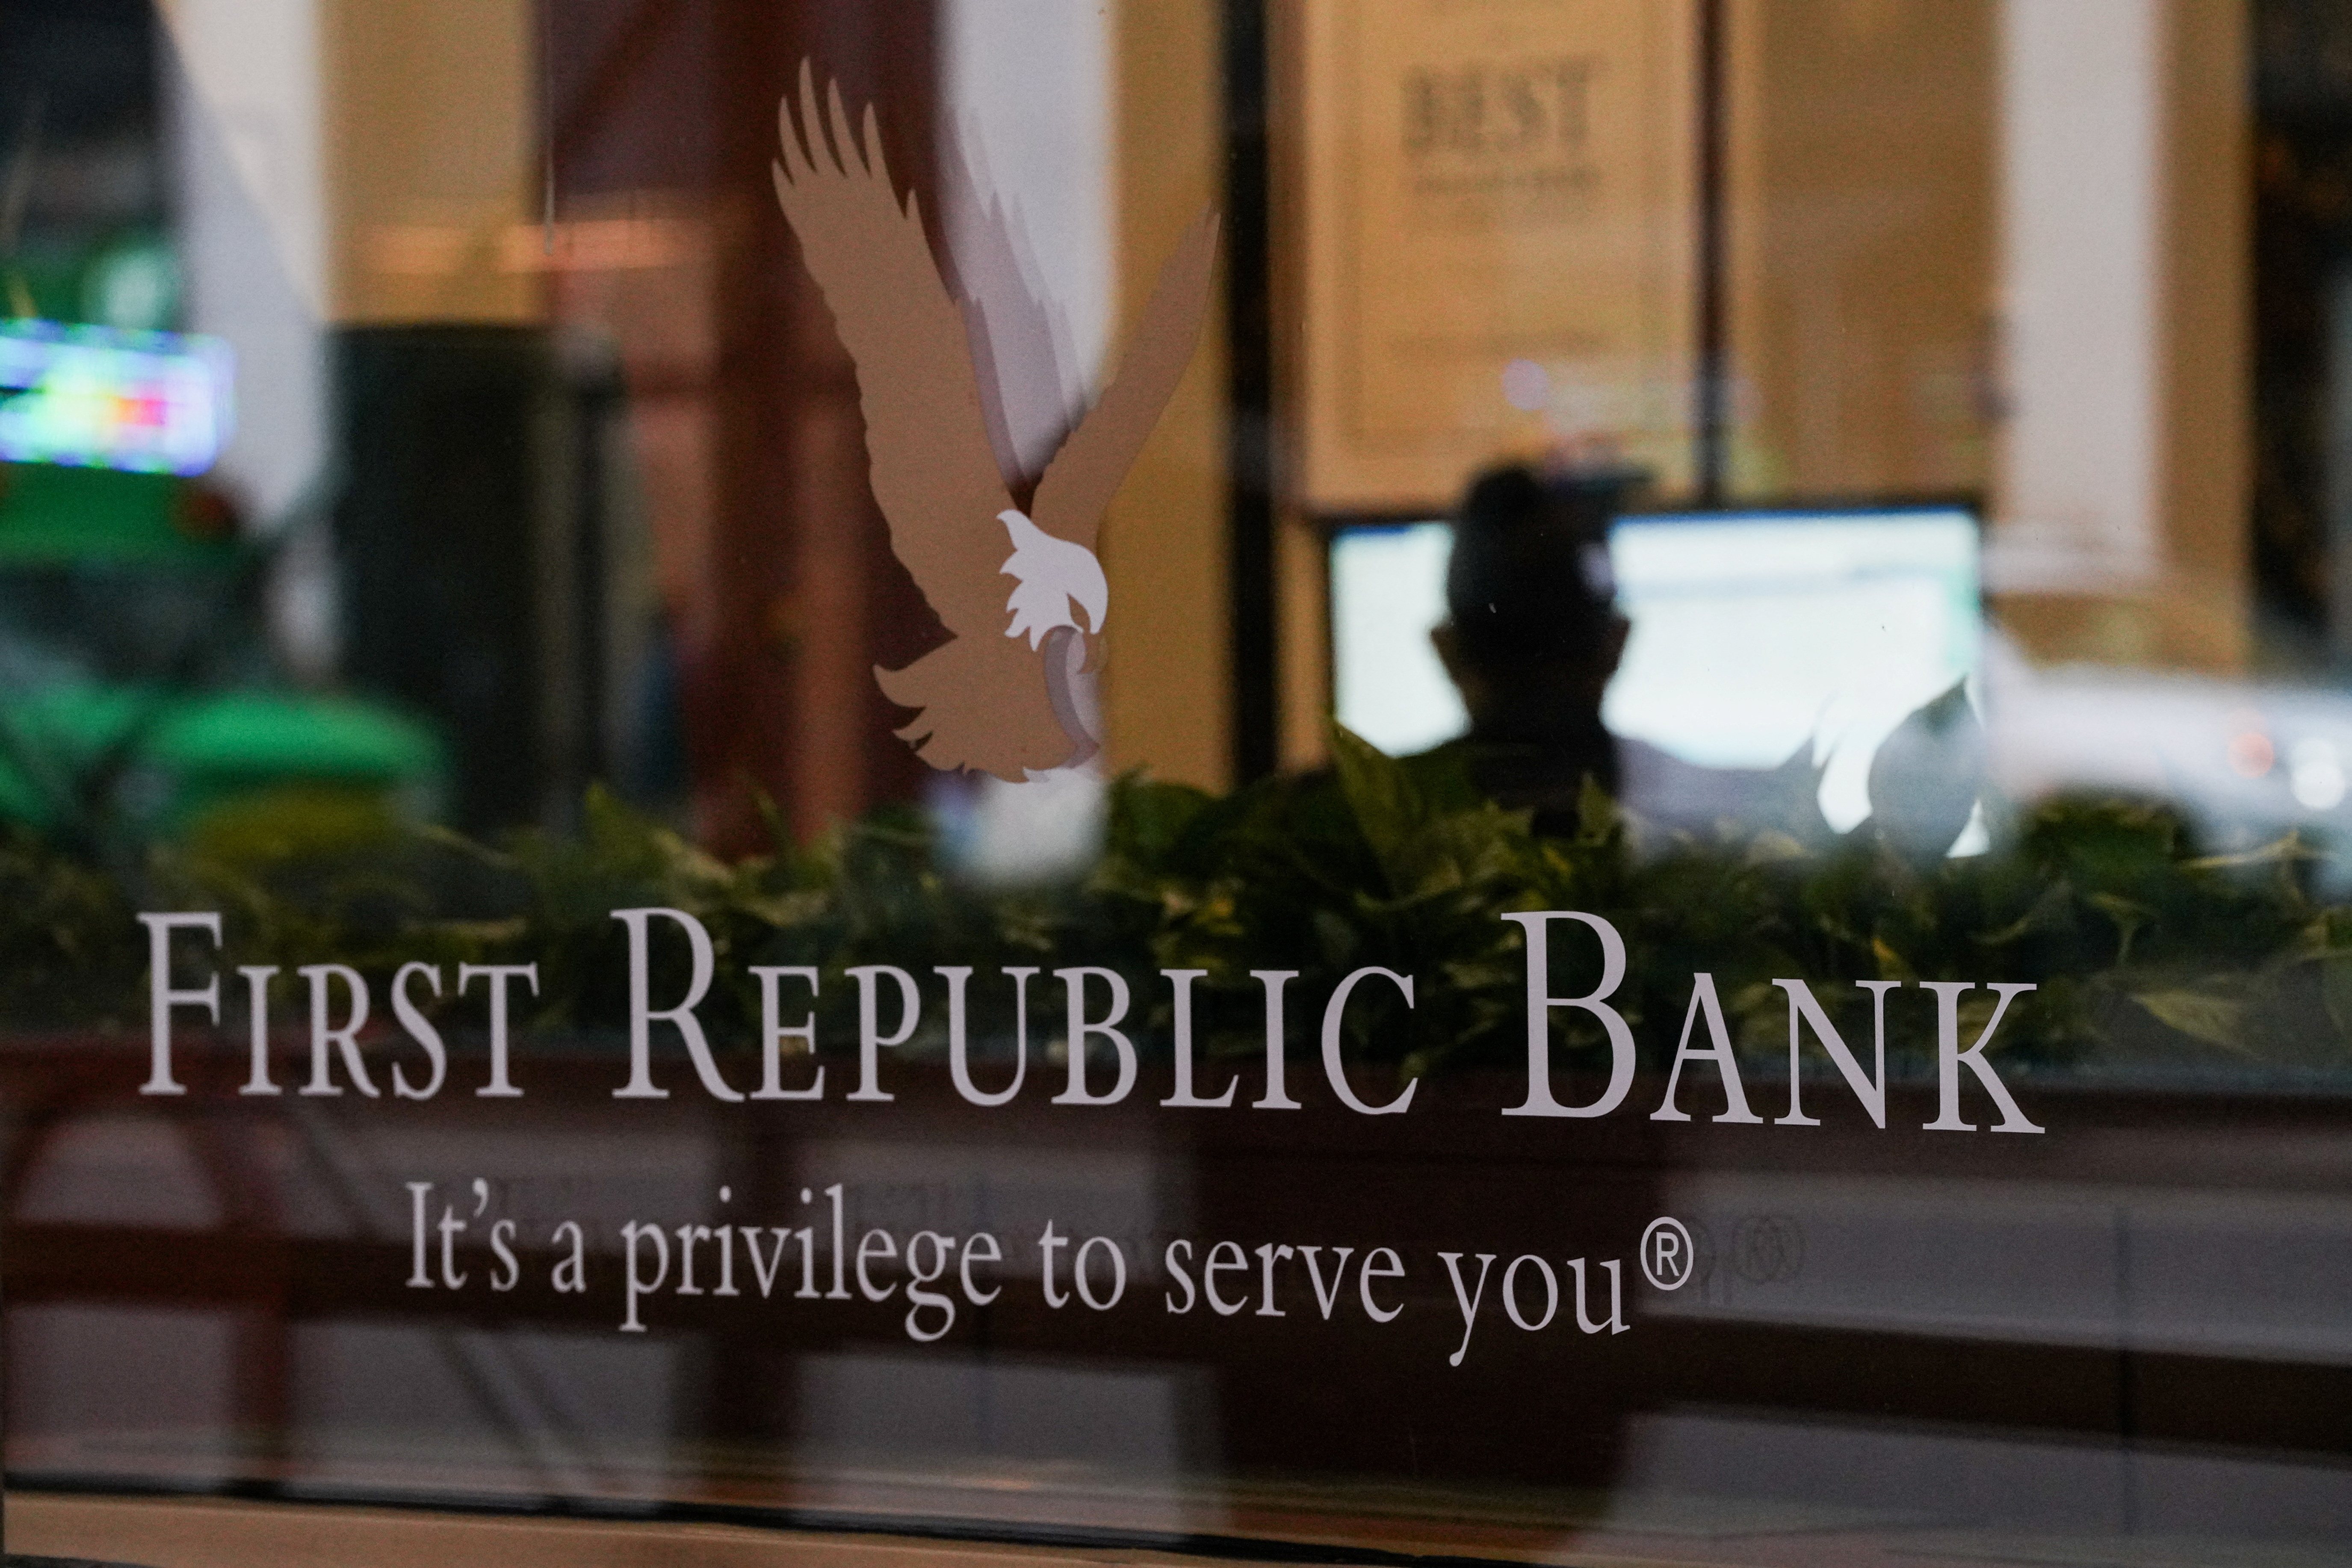 The Park Avenue location of First Republic Bank, in New York City